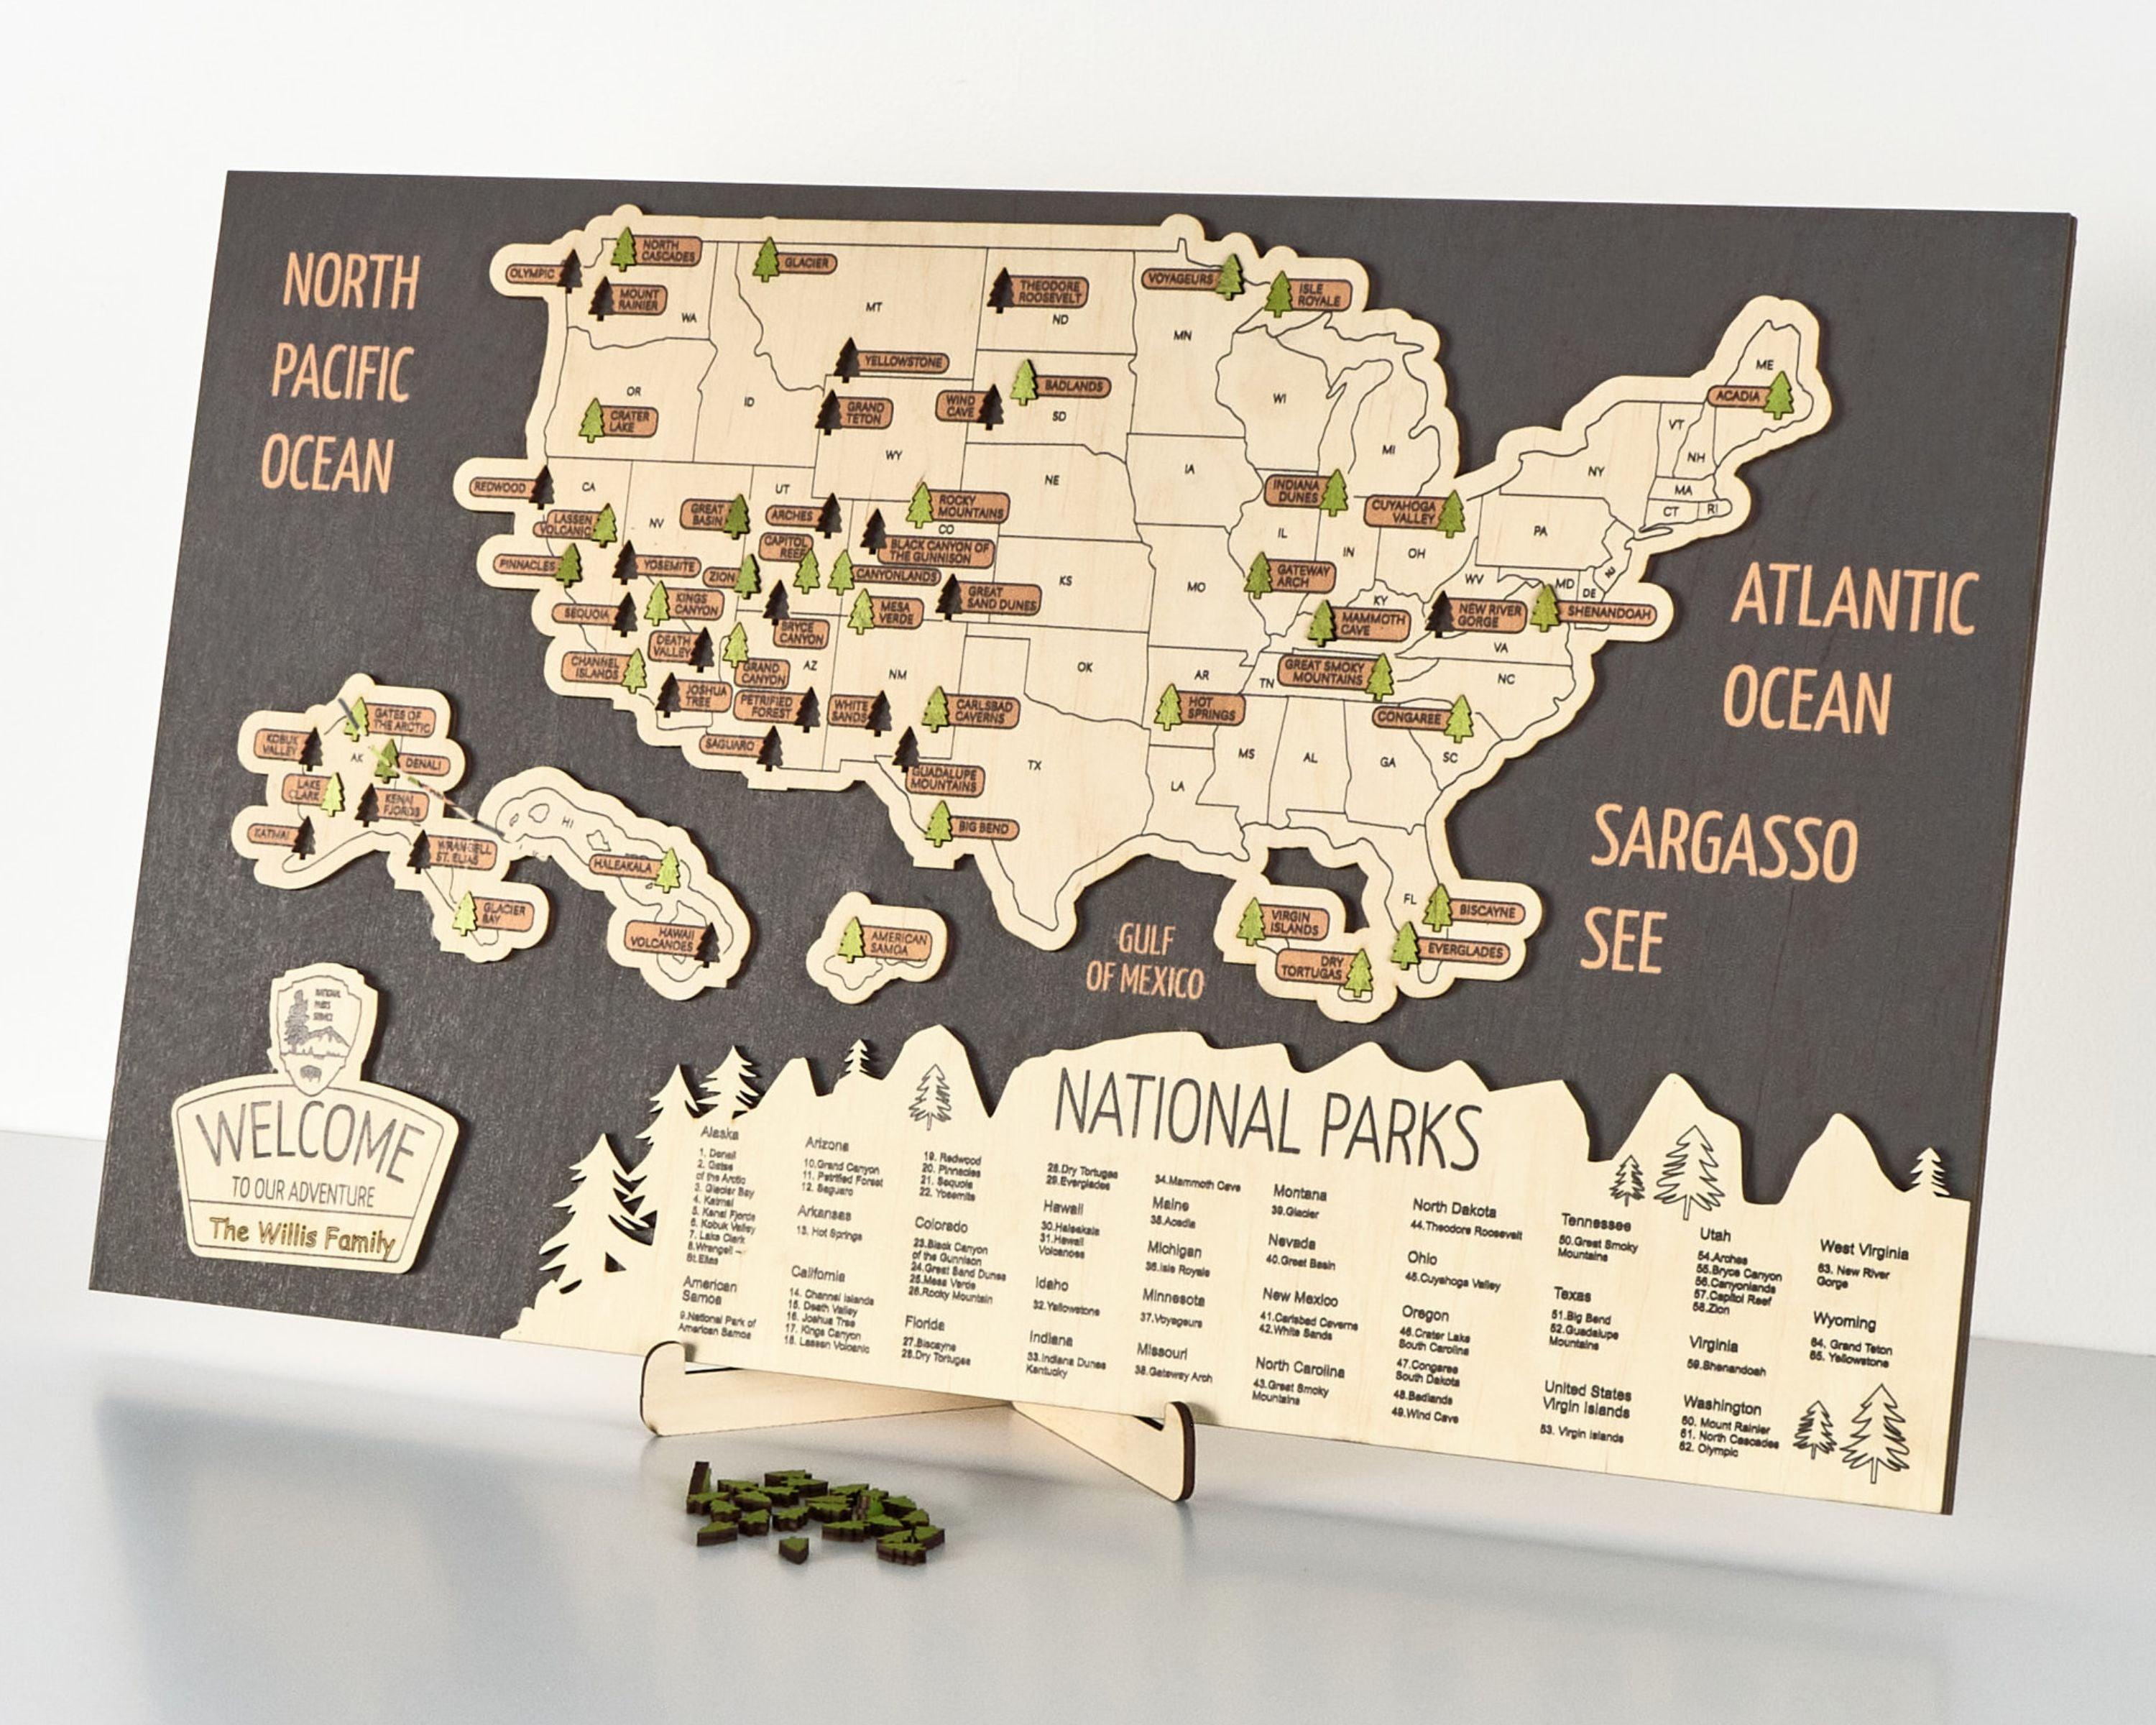 US 3D Wooden National Parks Travel Map With Trees To Record Park Visits (New Dark) - Lemap